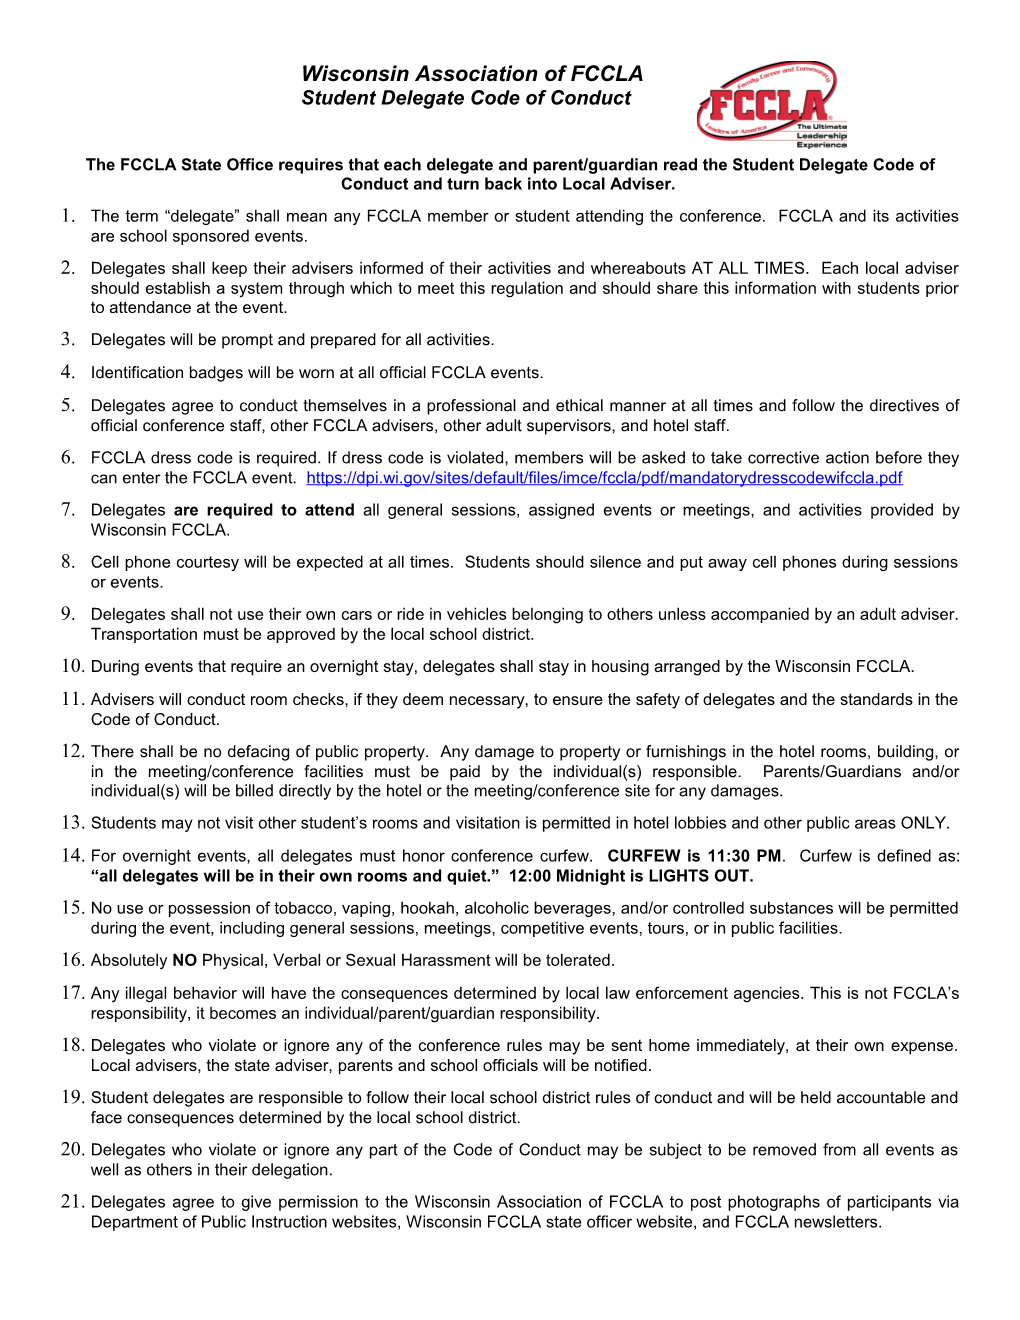 Wisconsin FCCLA Code of Conduct Forms